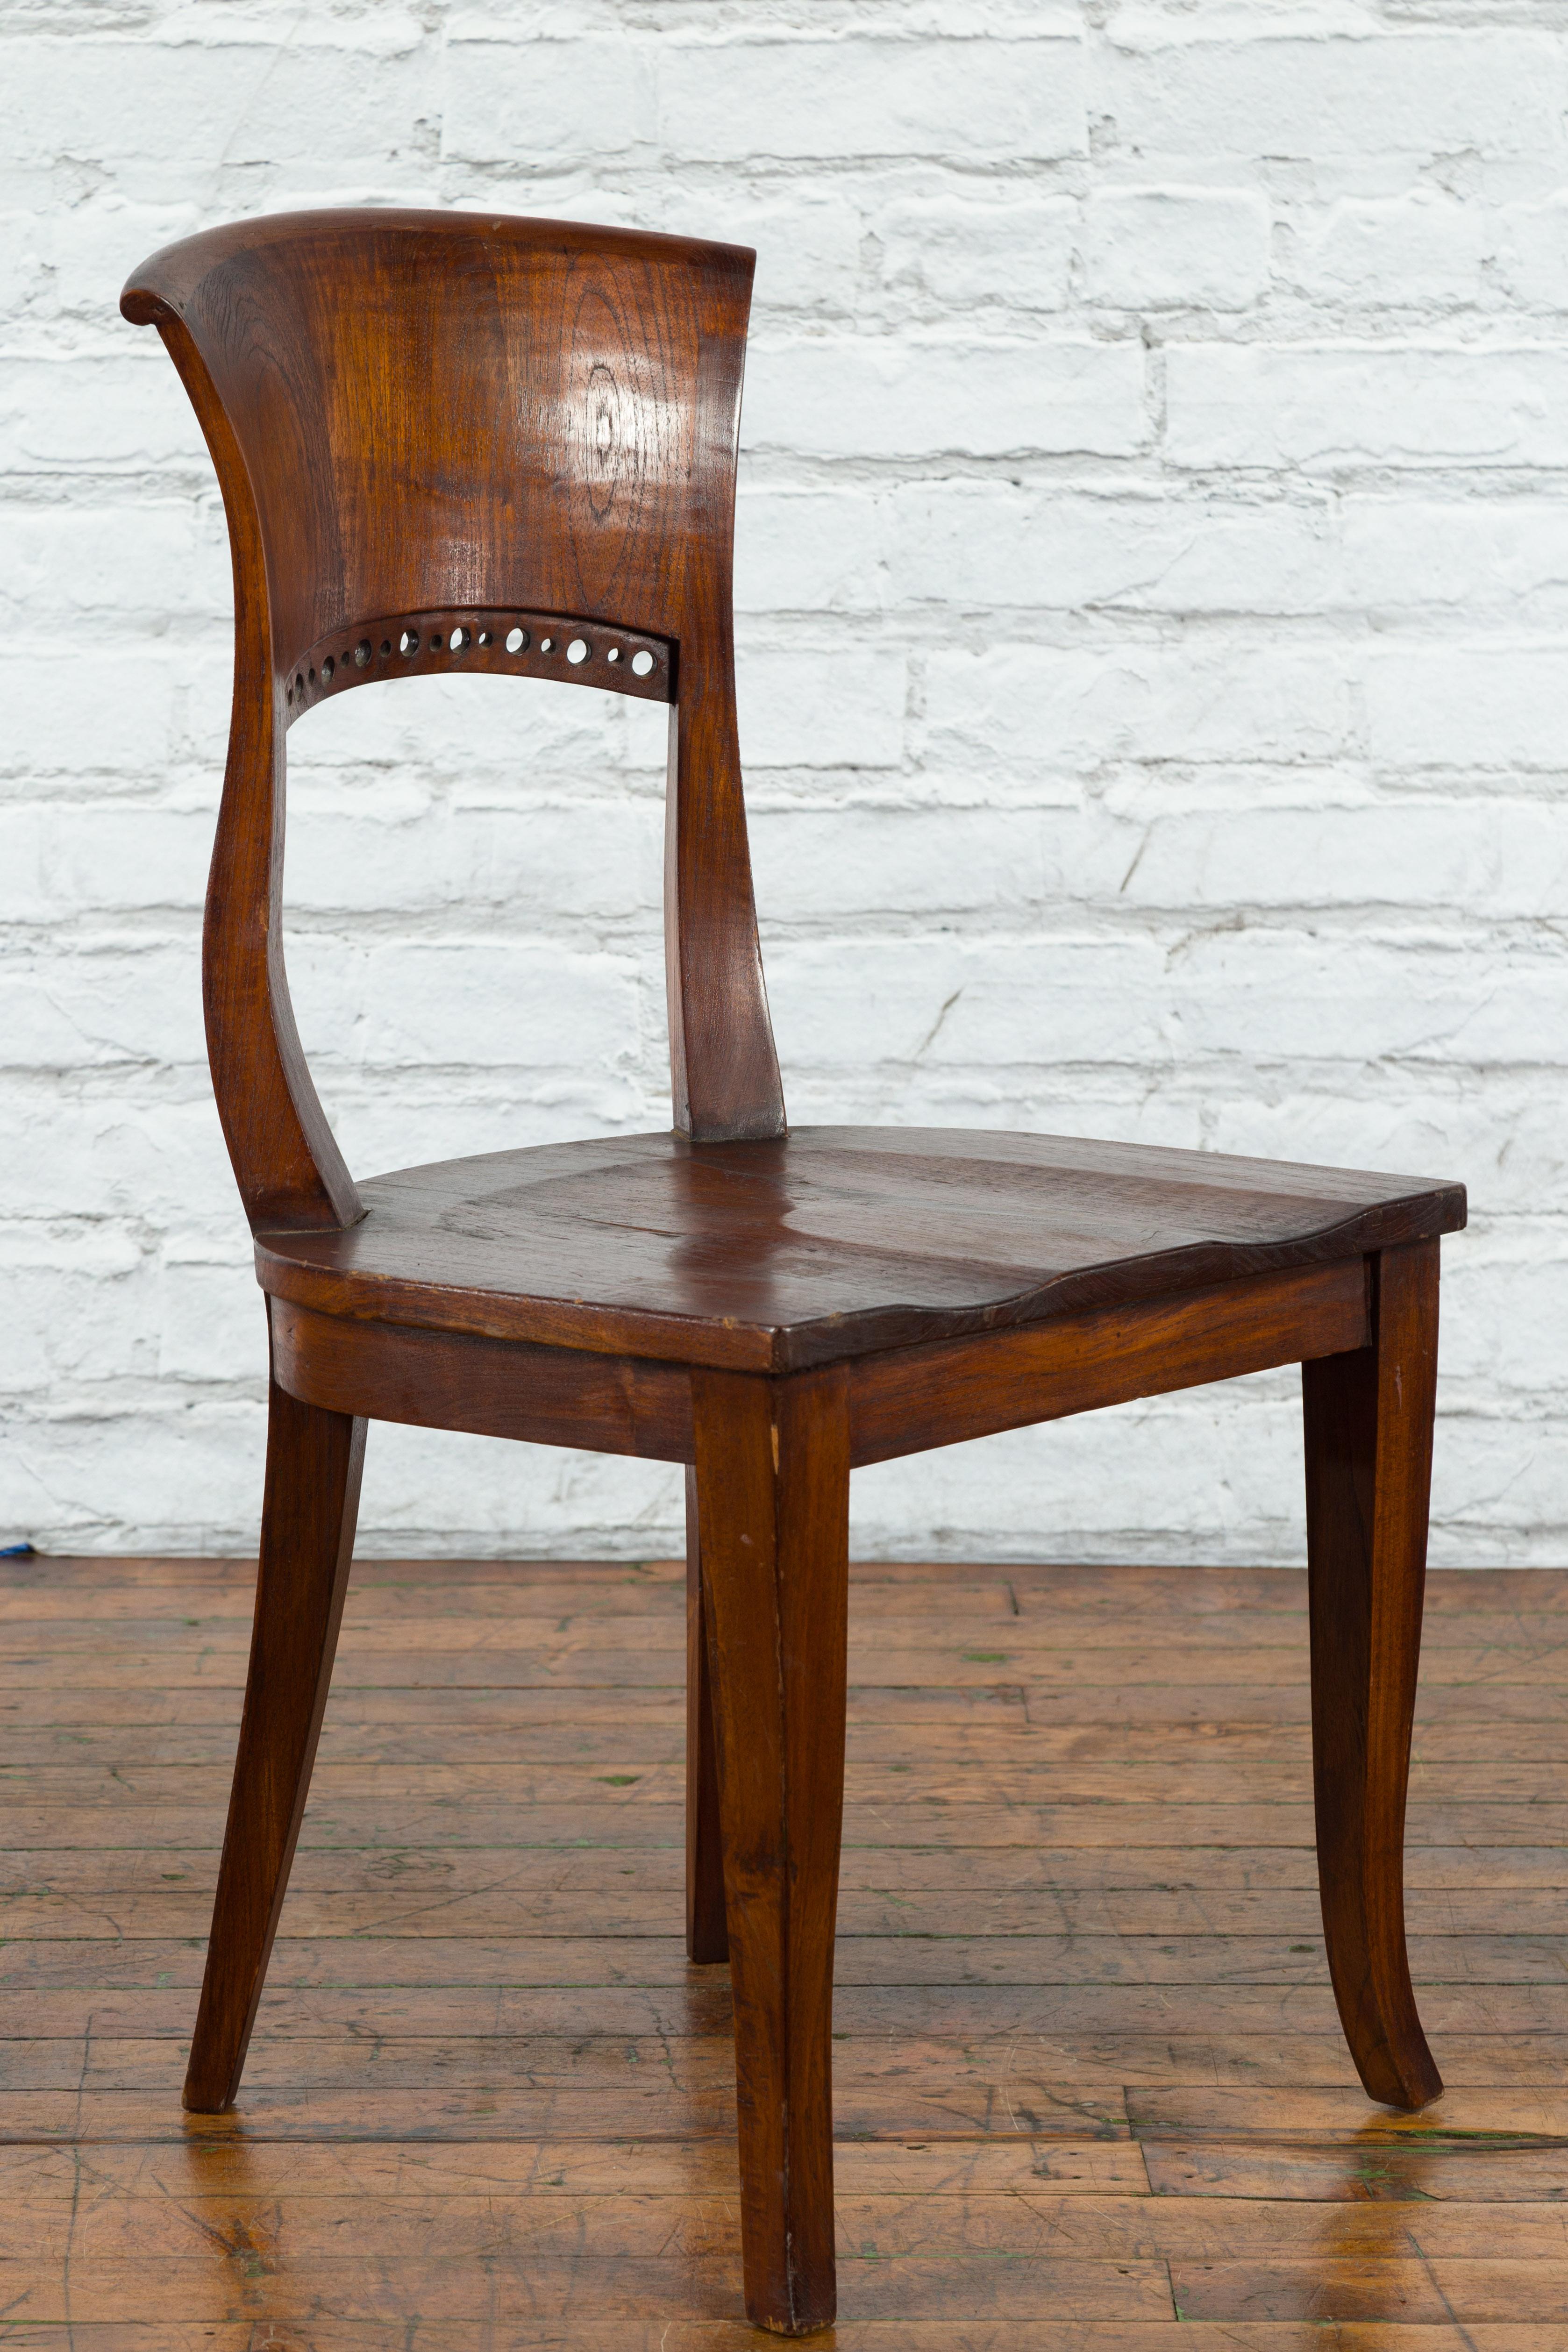 20th Century Vintage Indonesia Wooden Accent Chair with Pierced Circular Motifs Curving Back For Sale